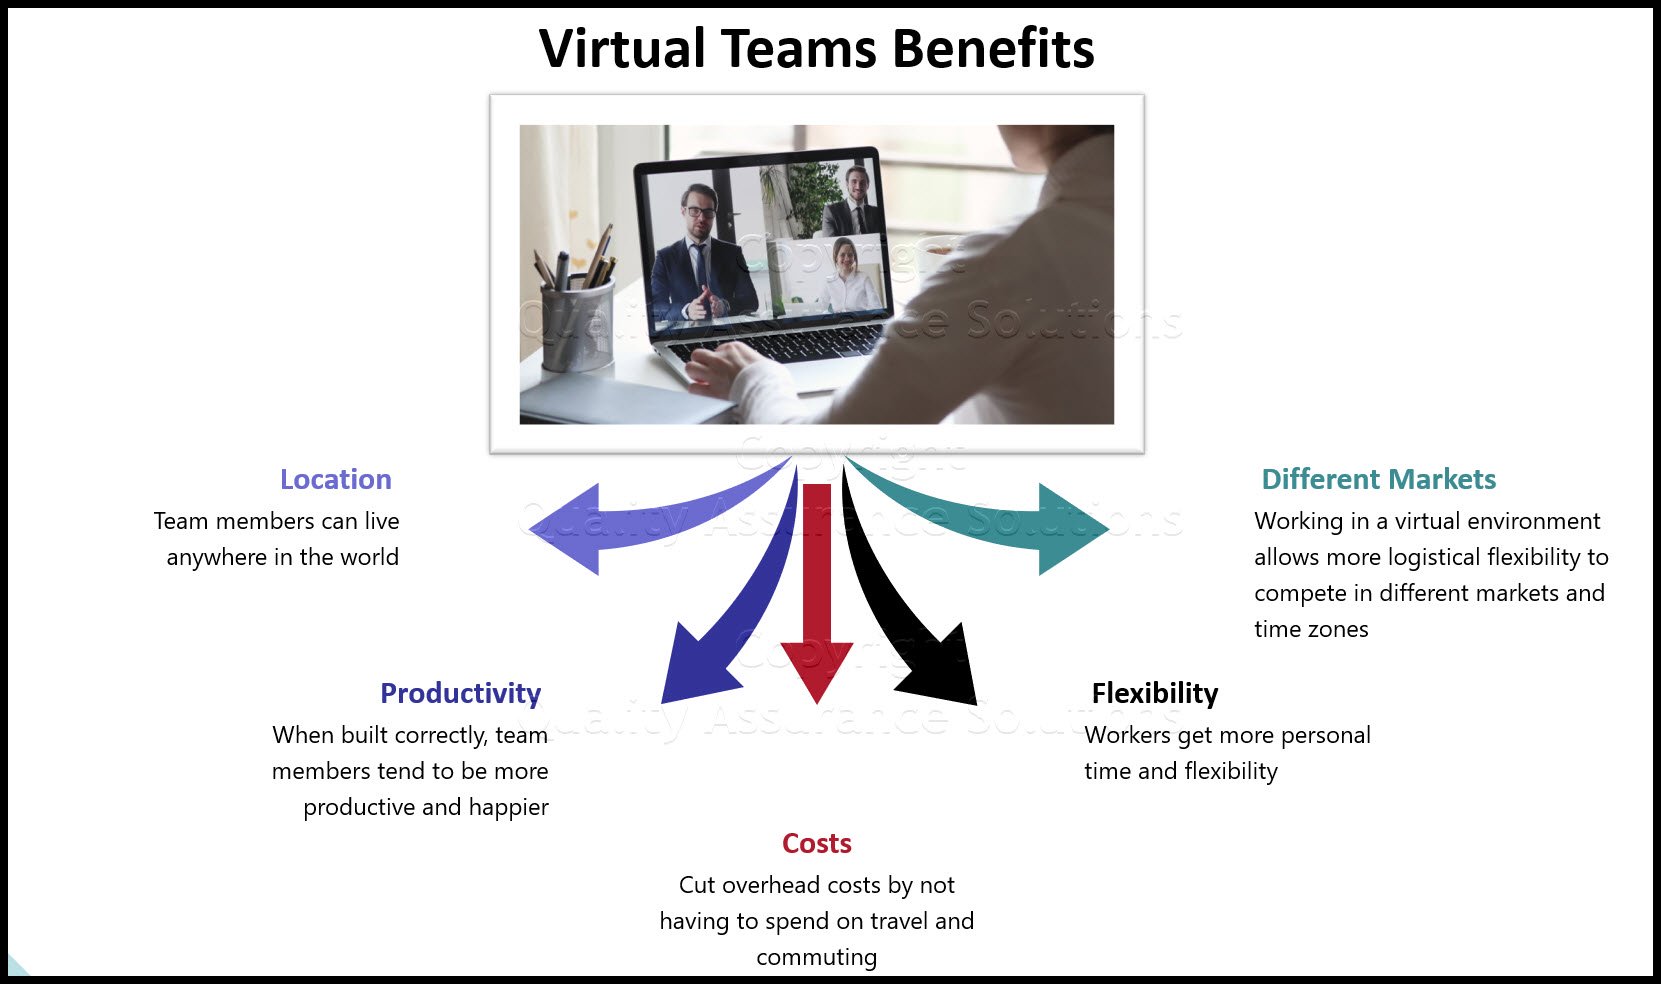 Advantages of virtual teams to build your business compete in any market.